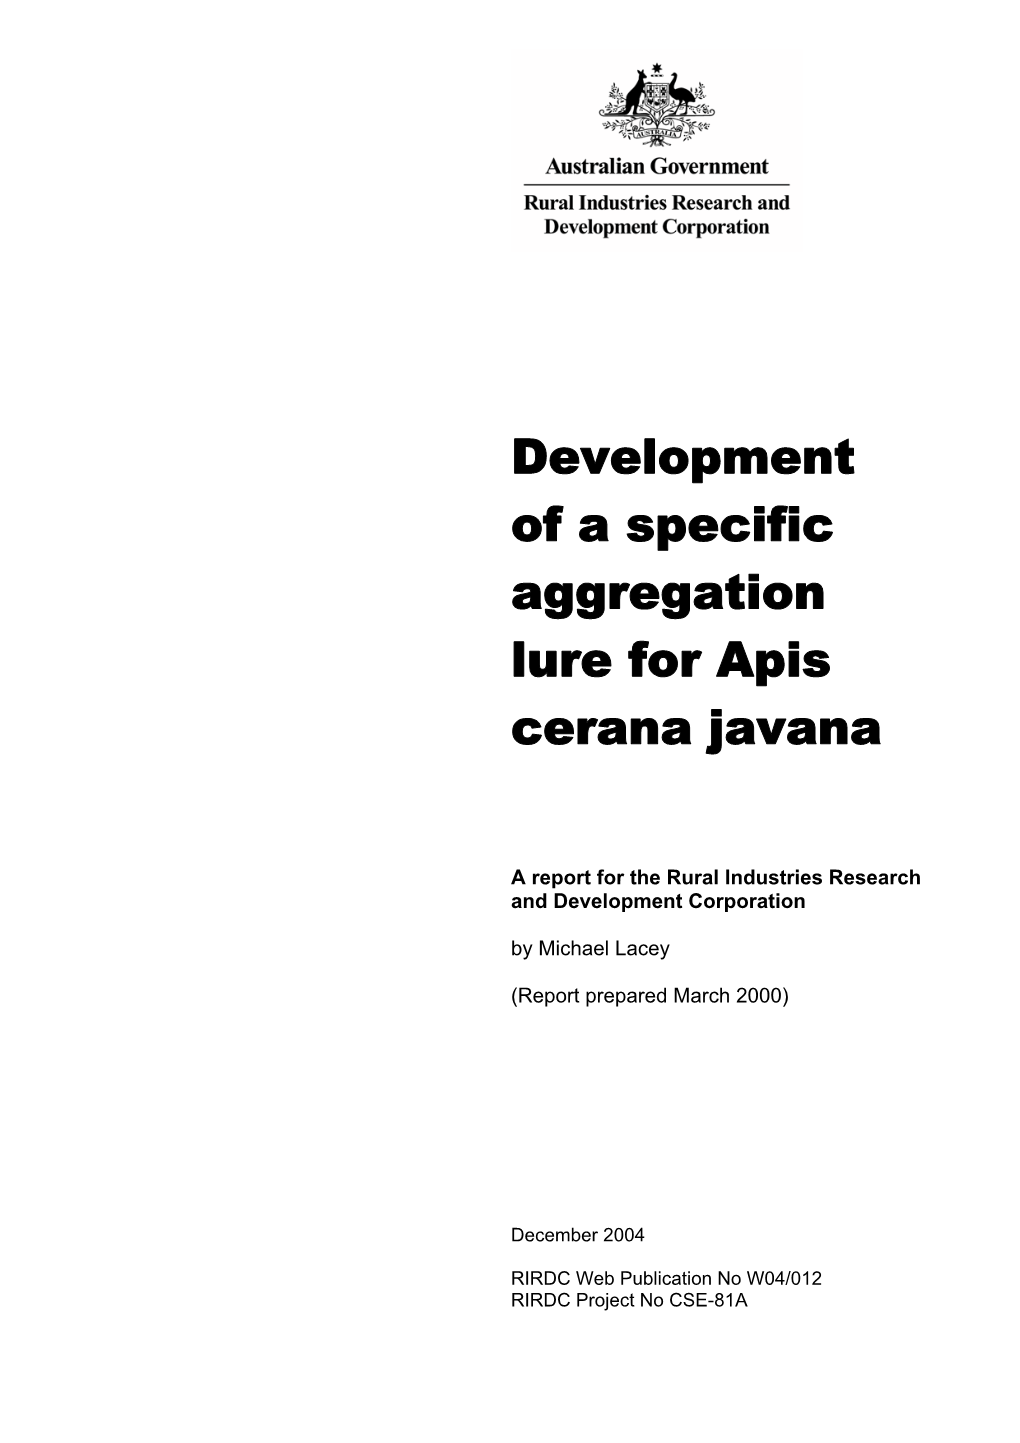 Development of a Specific Aggregation Lure for Apis Cerana Javana